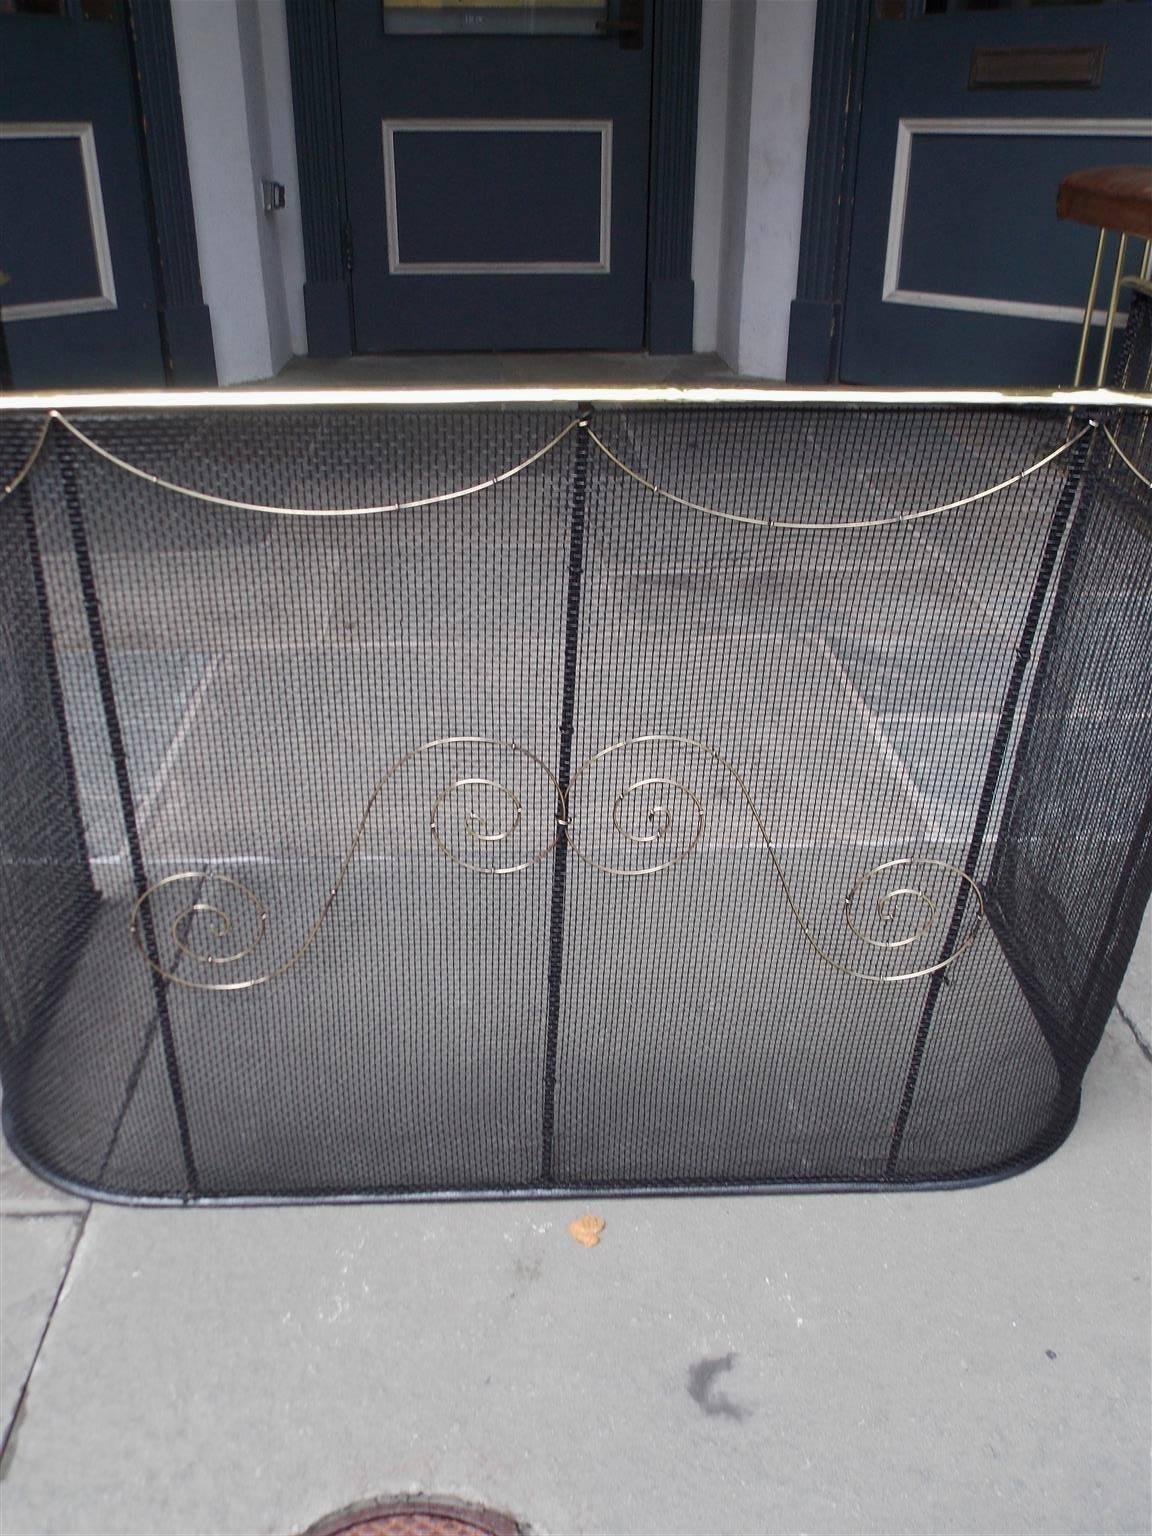 American Colonial American Wrought Iron and Brass Rail Nursery Fire Place Fender, NY, Circa 1810